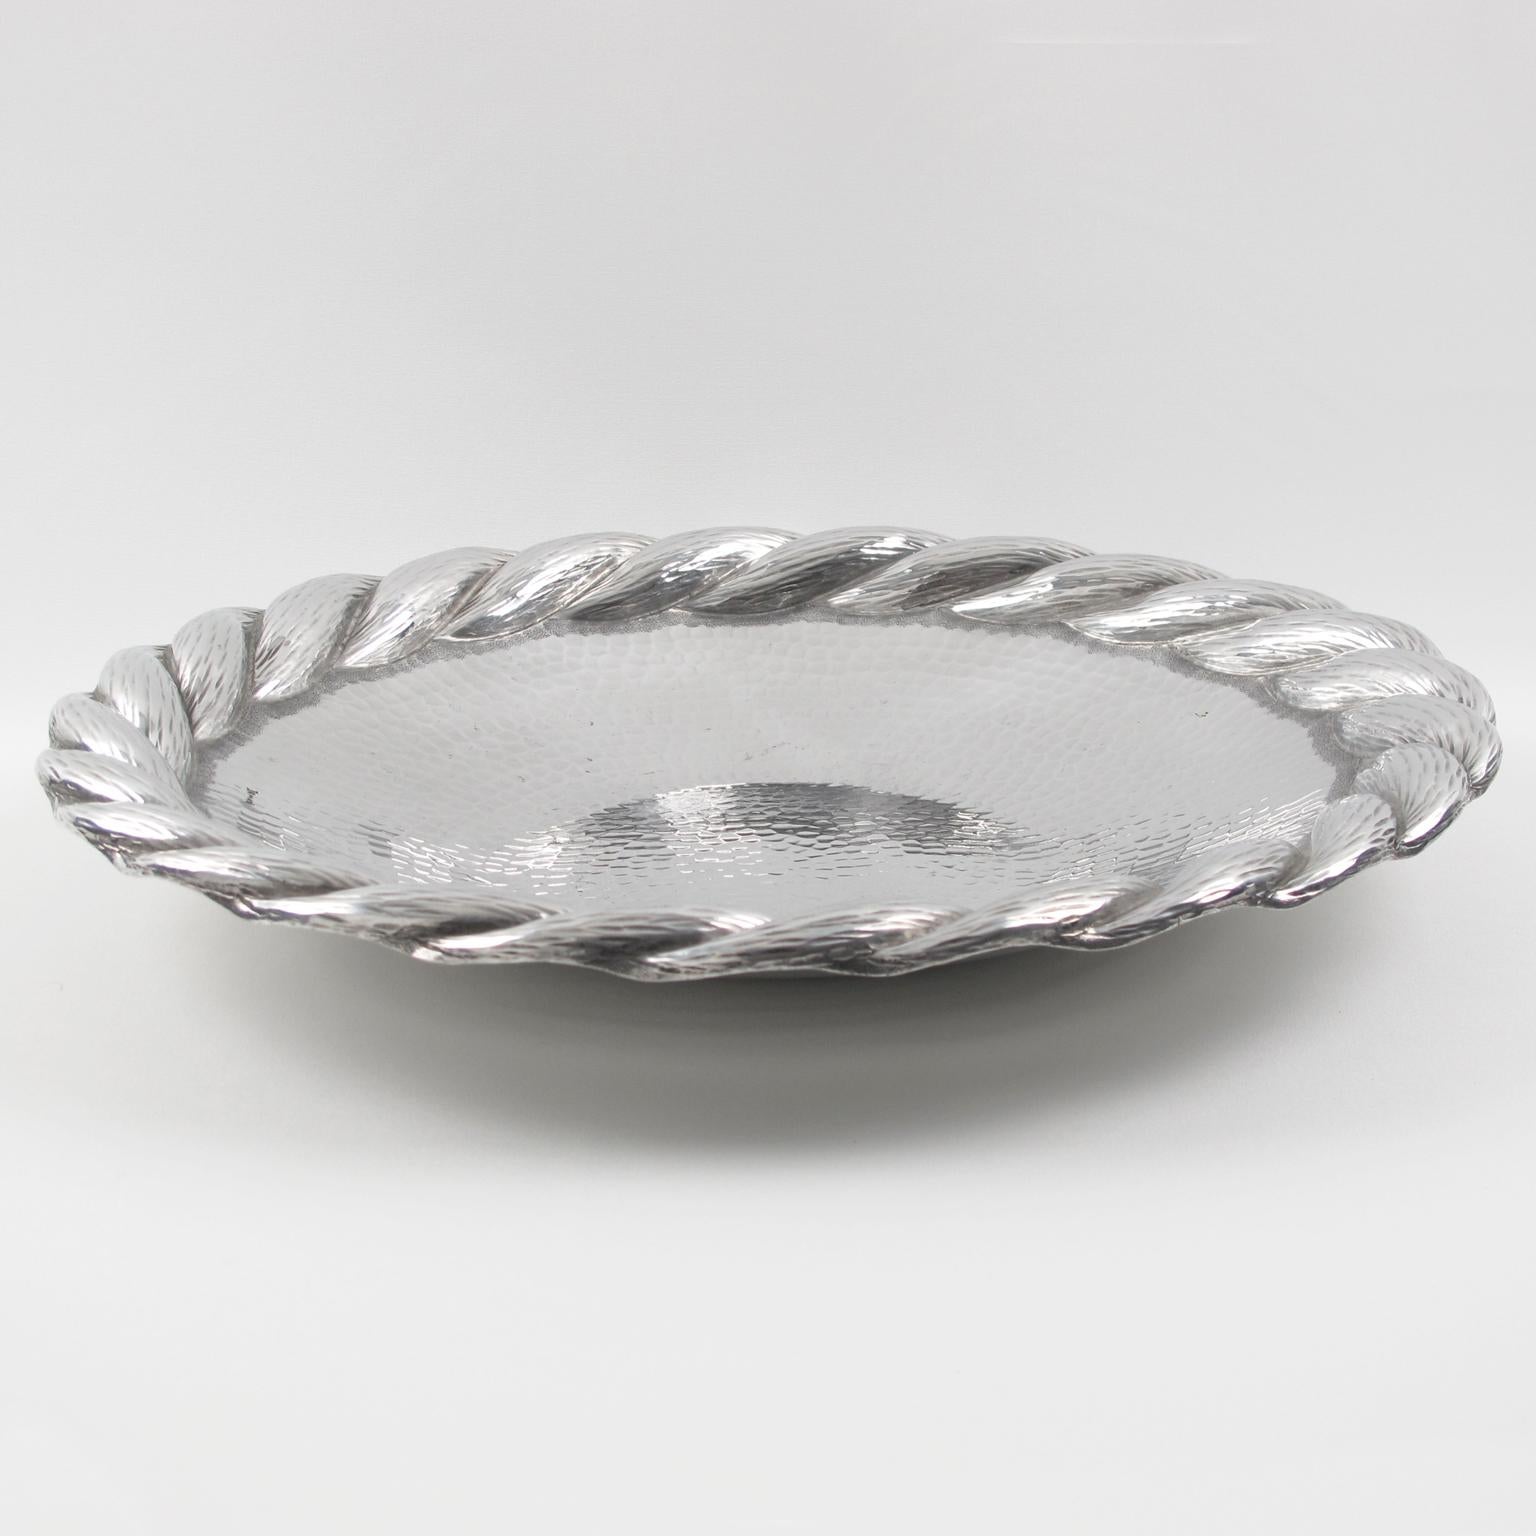 Mid-20th Century Art Deco Aluminum Platter Centerpiece or Tray by Irman France, 1930s For Sale